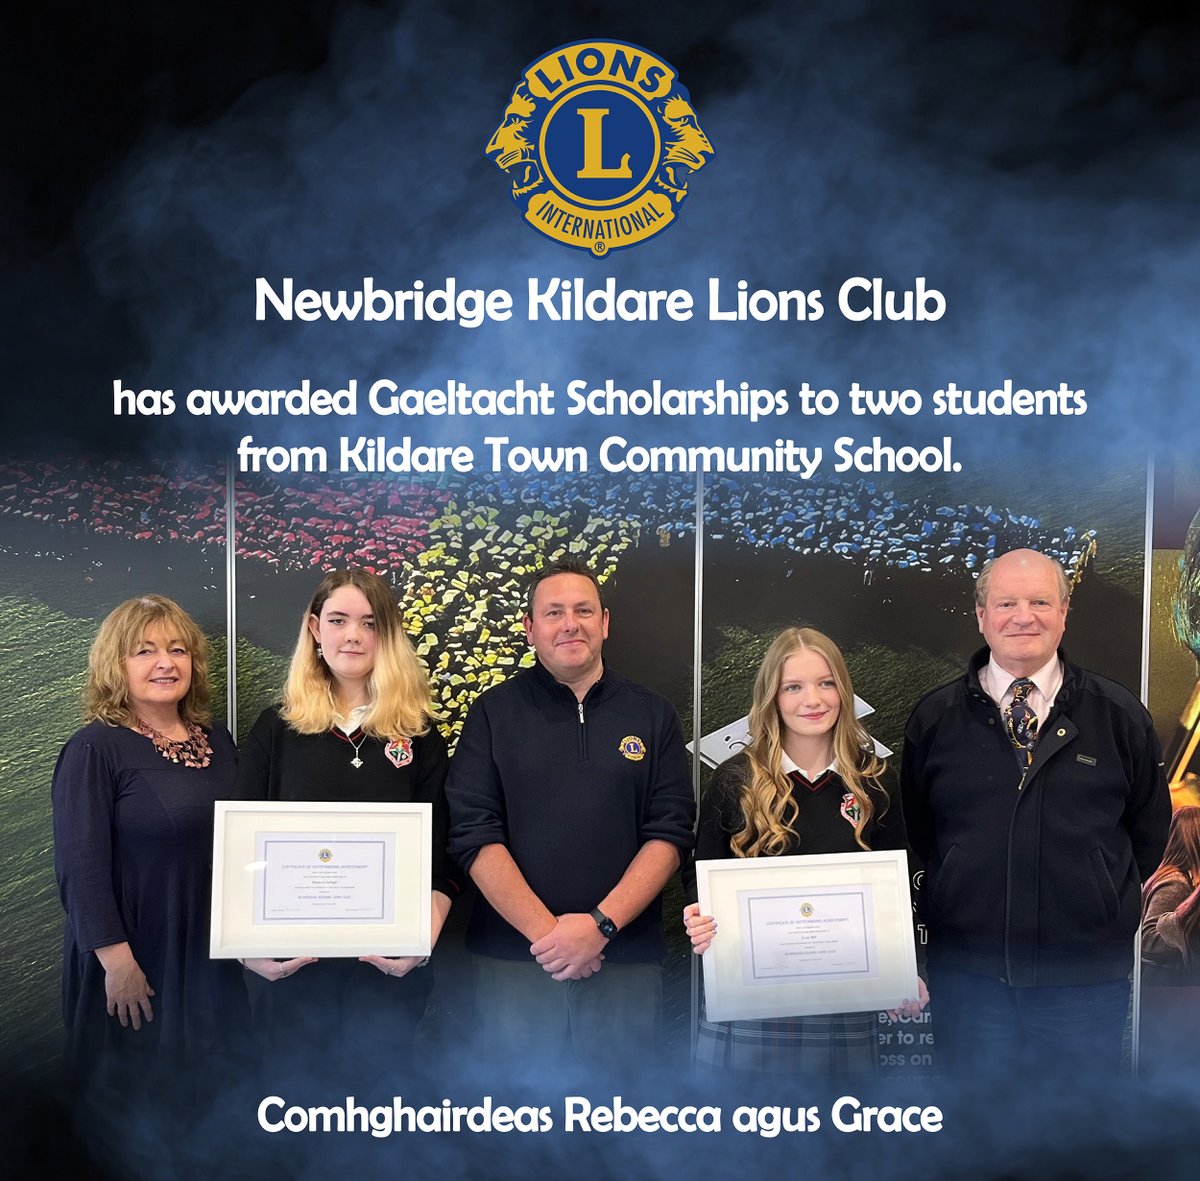 Newbridge Kildare Lions Club are delighted to again award Gaeltacht Scholarships to two outstanding students from Kildare Town Community School. Comhghairdeas Rebecca agus Grace. We hope that you have a fabulous two weeks of learning and fun at the Gaeltacht this summer.